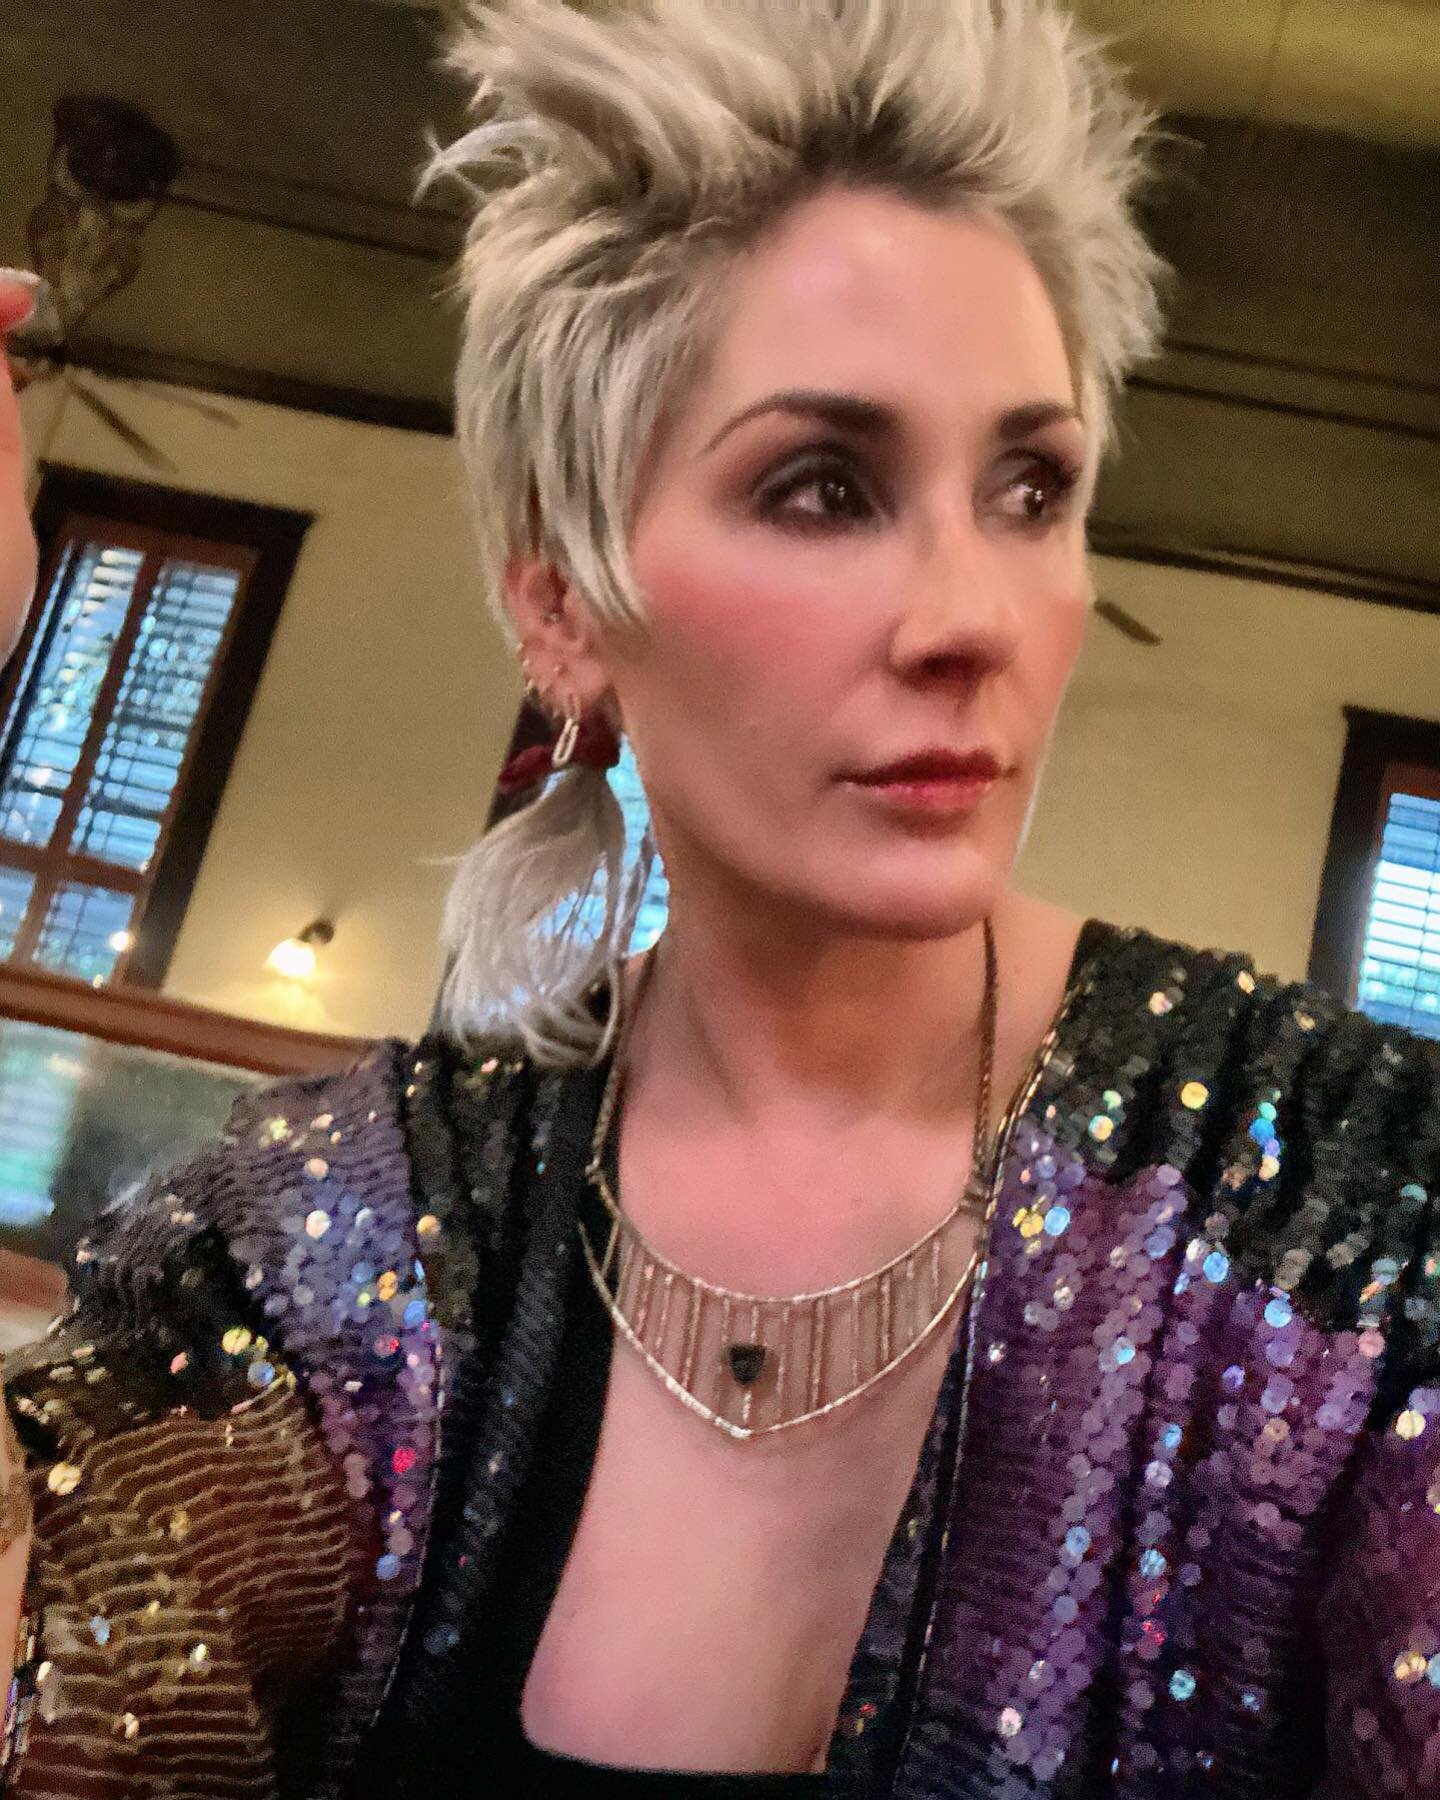 At my absolute favorite restaurant tonight, wearing my mother&rsquo;s sequin jacket, feeling very slay.  The daughter I never had was going to be named Sequin.  Anyhow, &ldquo;Don&rsquo;t bother telling what the oysters are called.  I won&rsquo;t rem